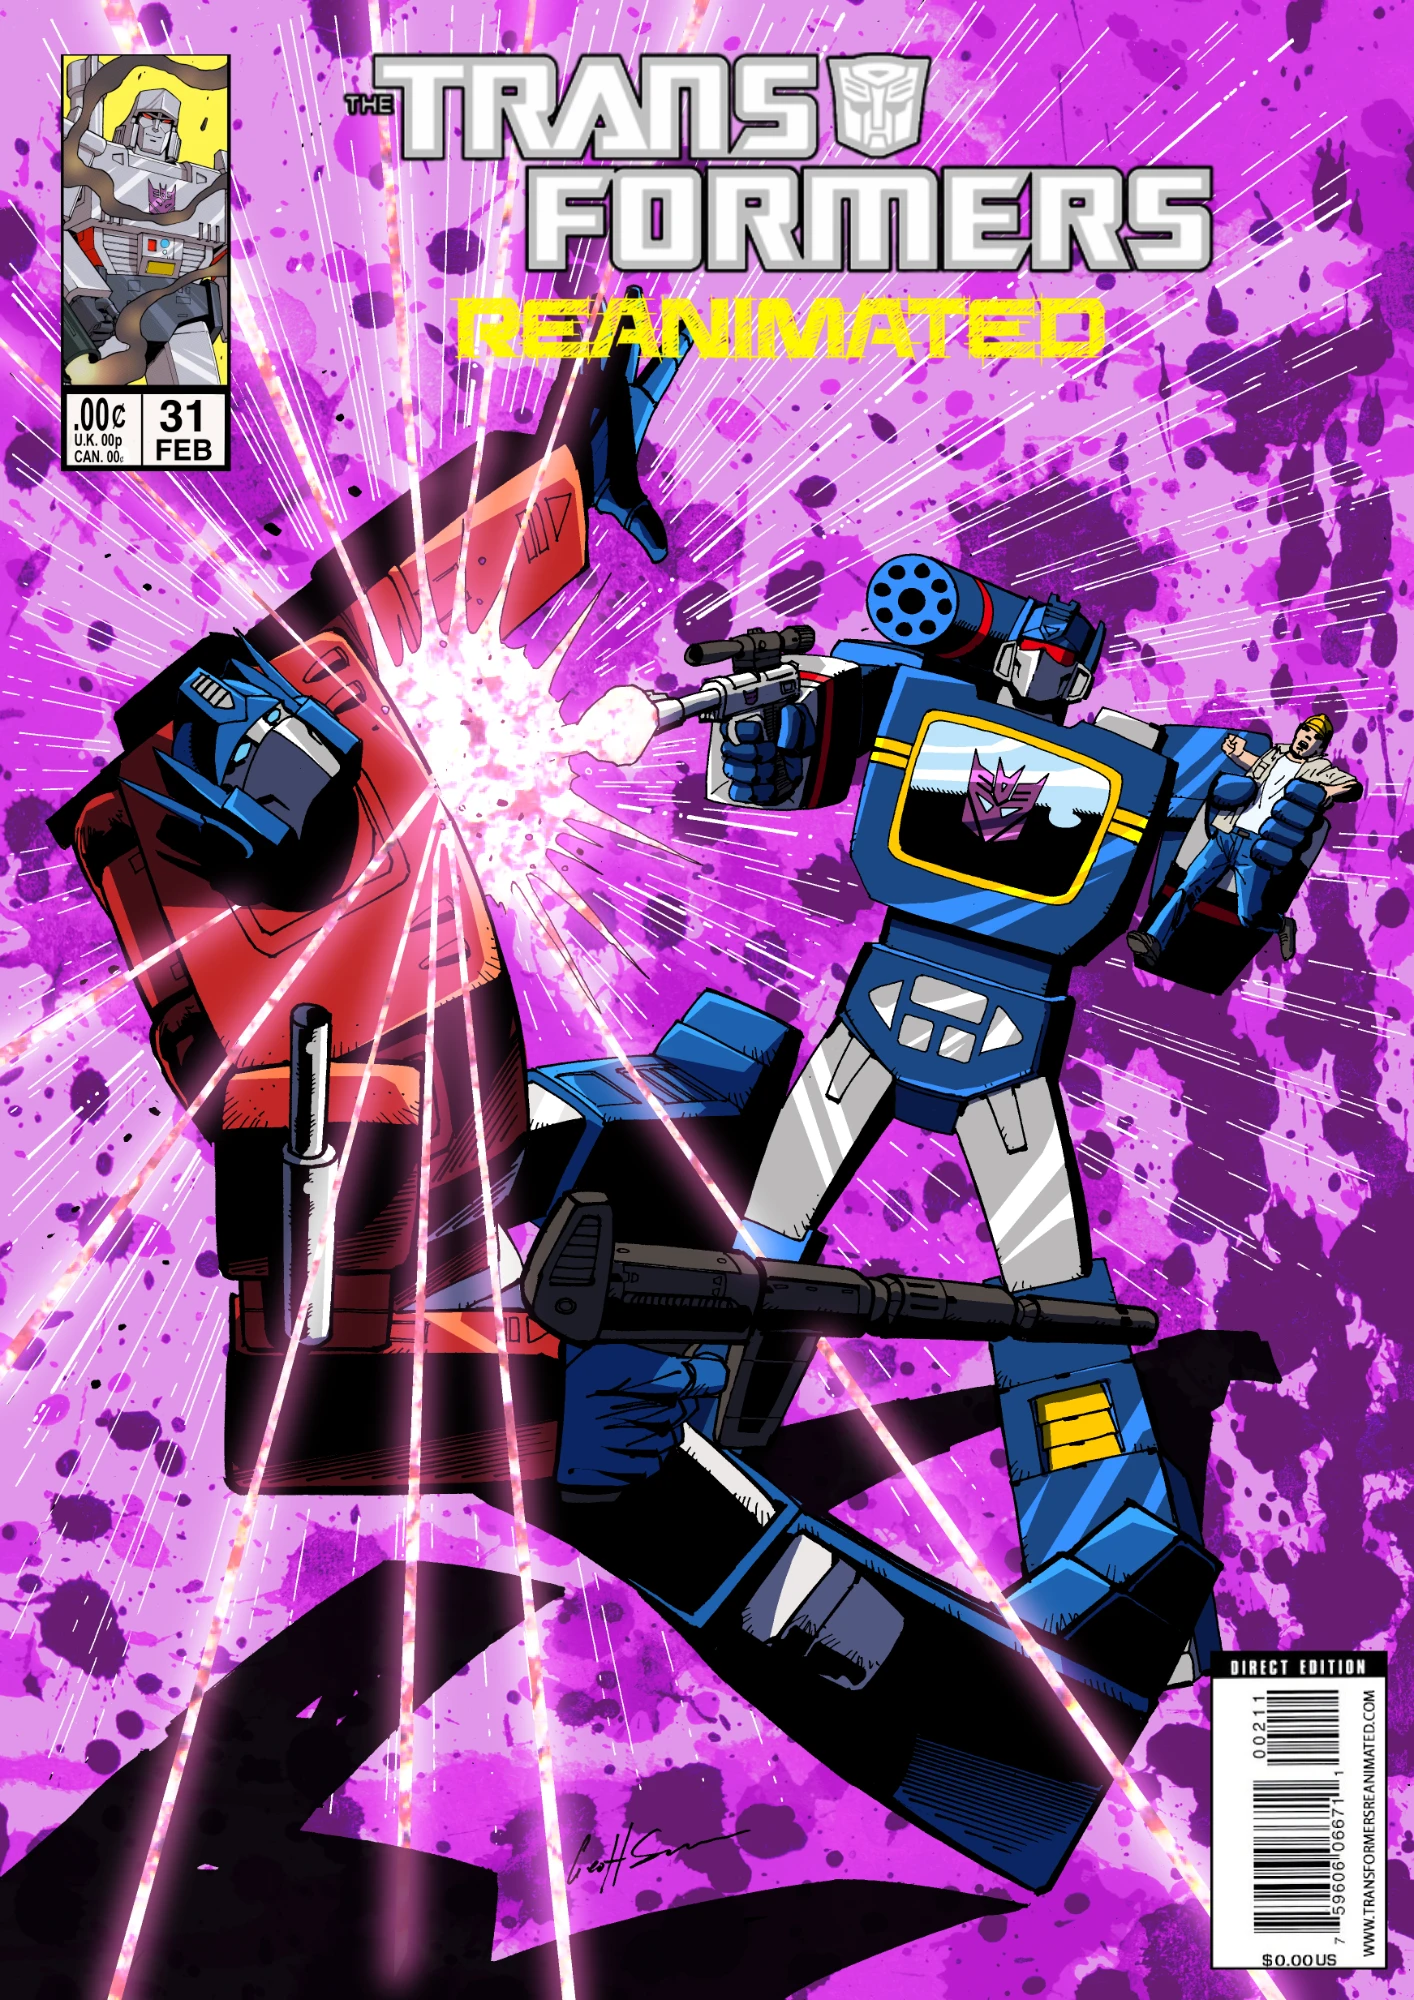 Transformers comic cover with Soundwave blasting Optimus Prime on top of a purple background